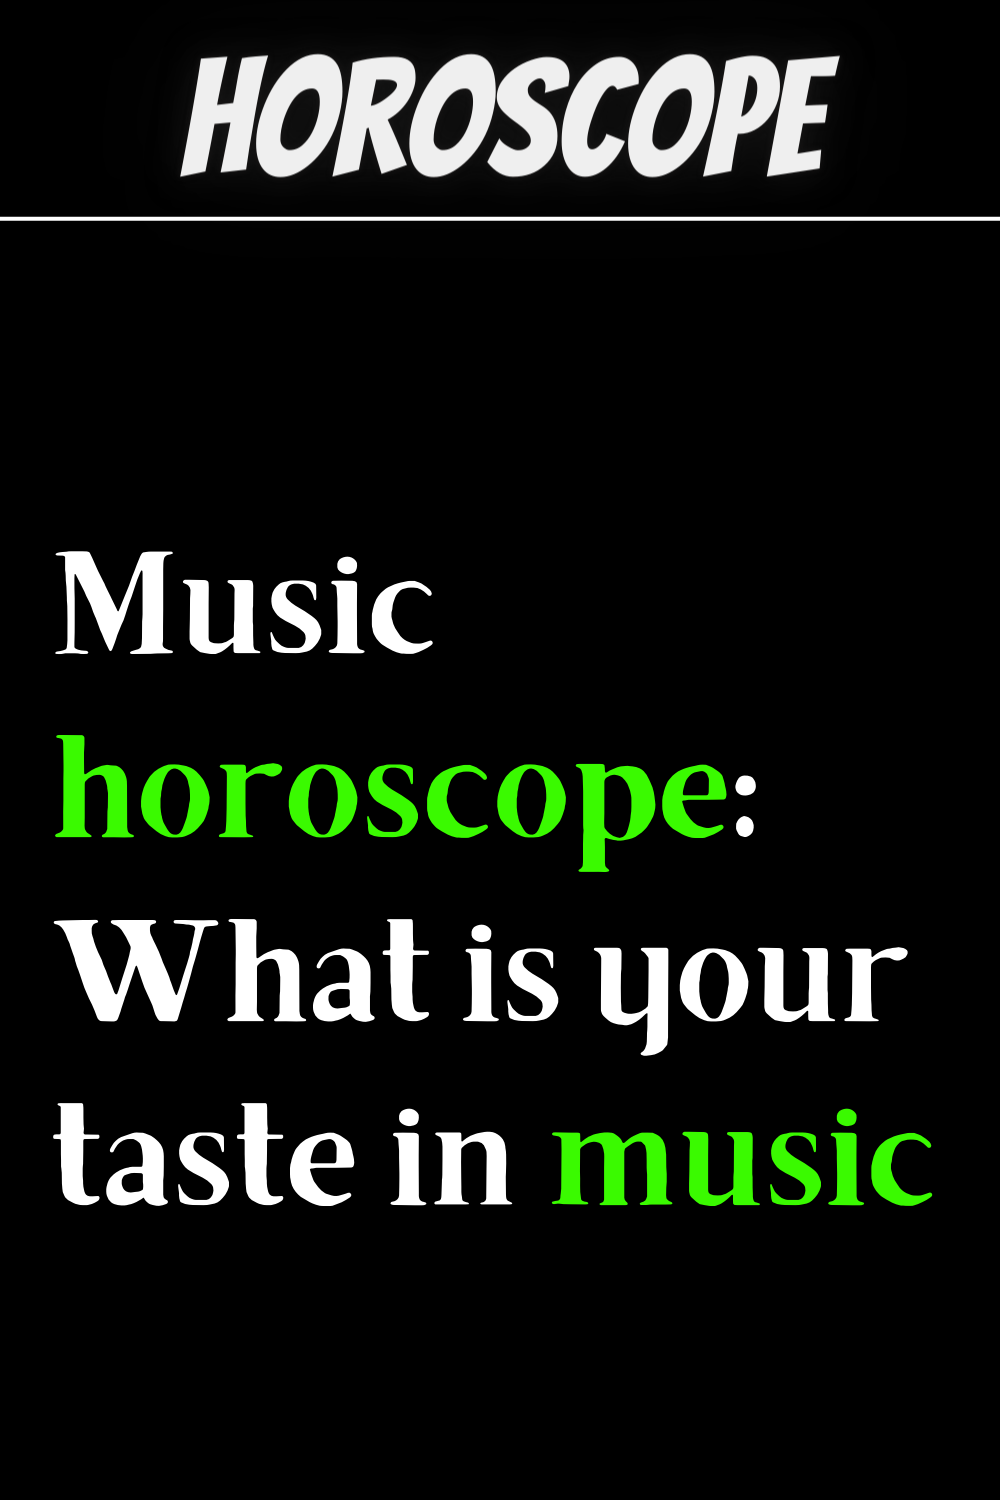 Music horoscope: What is your taste in music